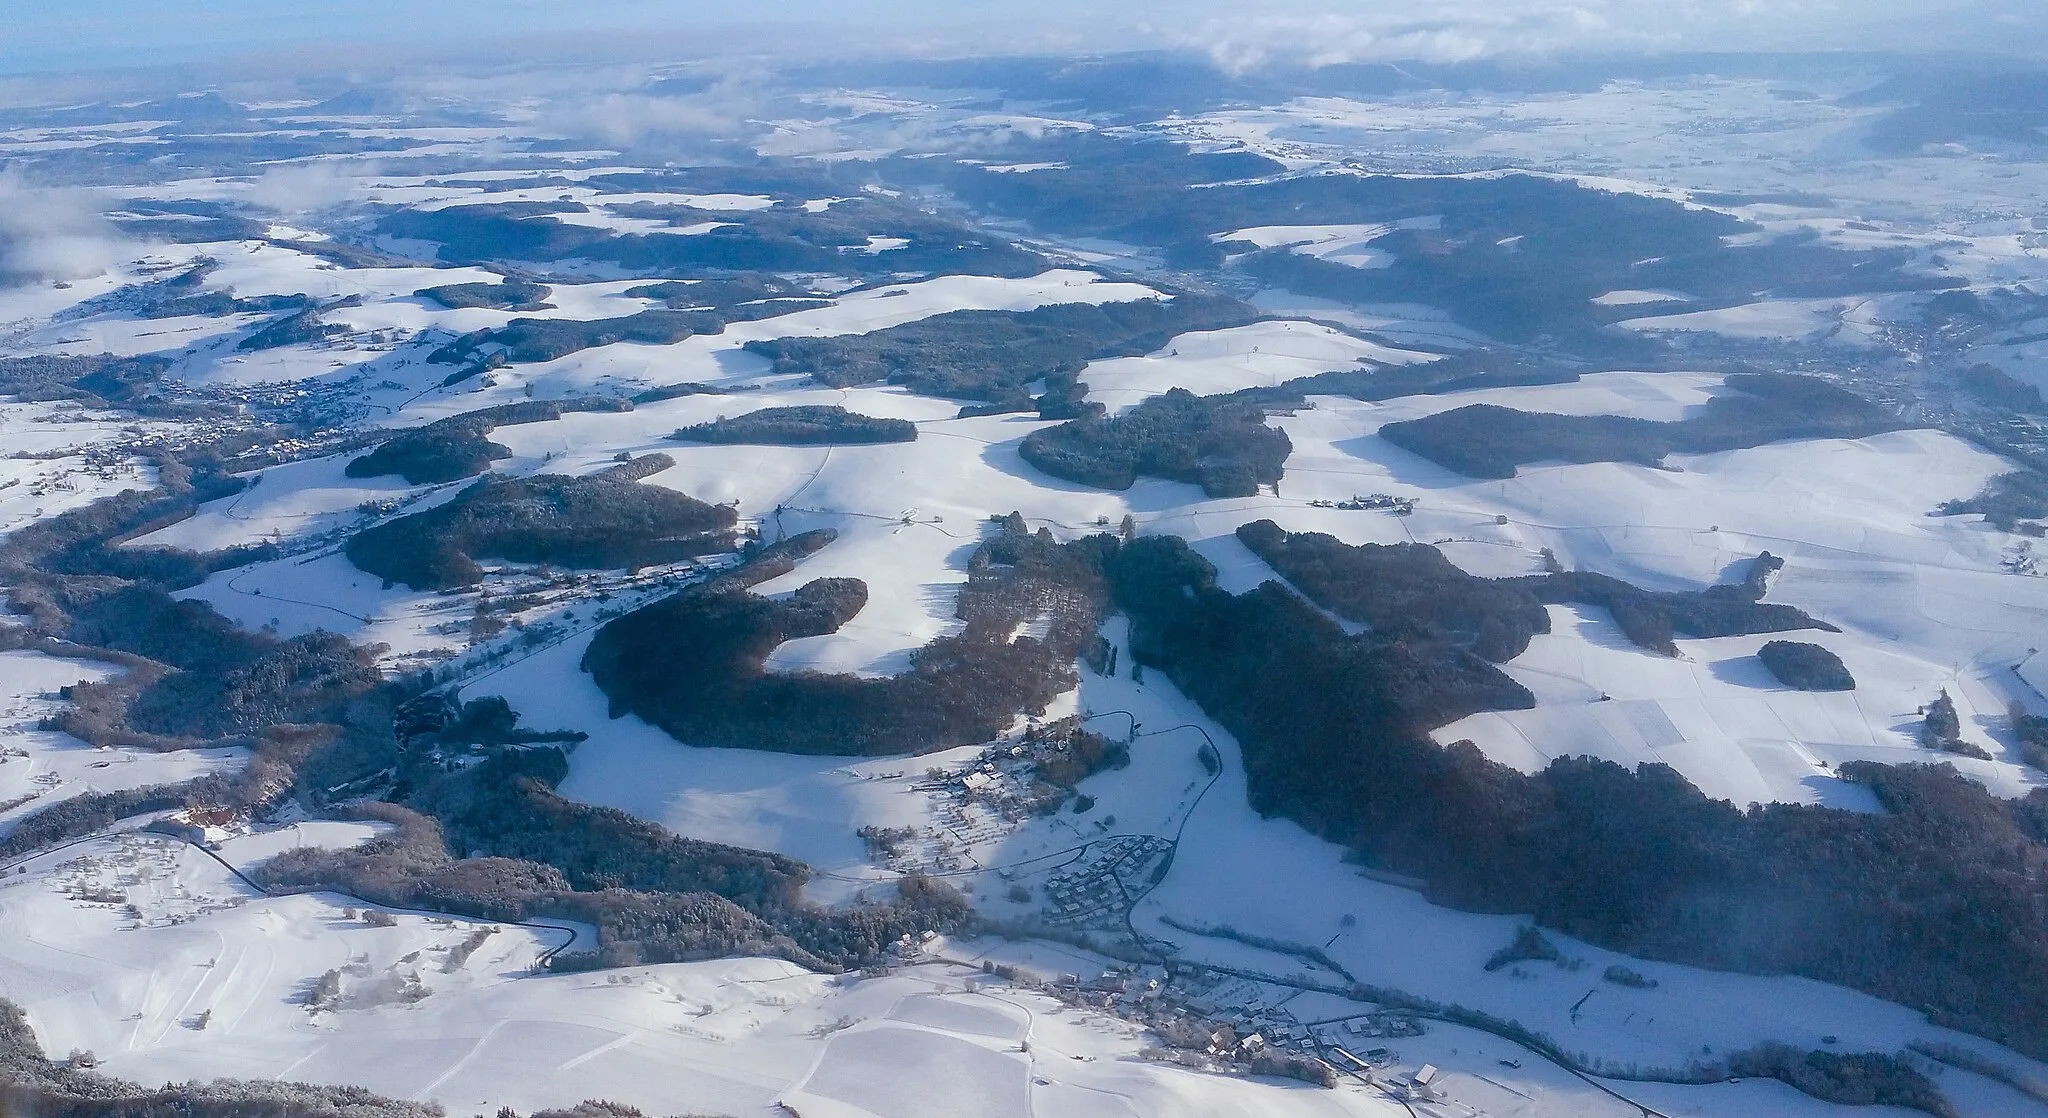 Photo showing: Germany, Baden-Württemberg, approach into ZRH across the Southern part of Black Forest